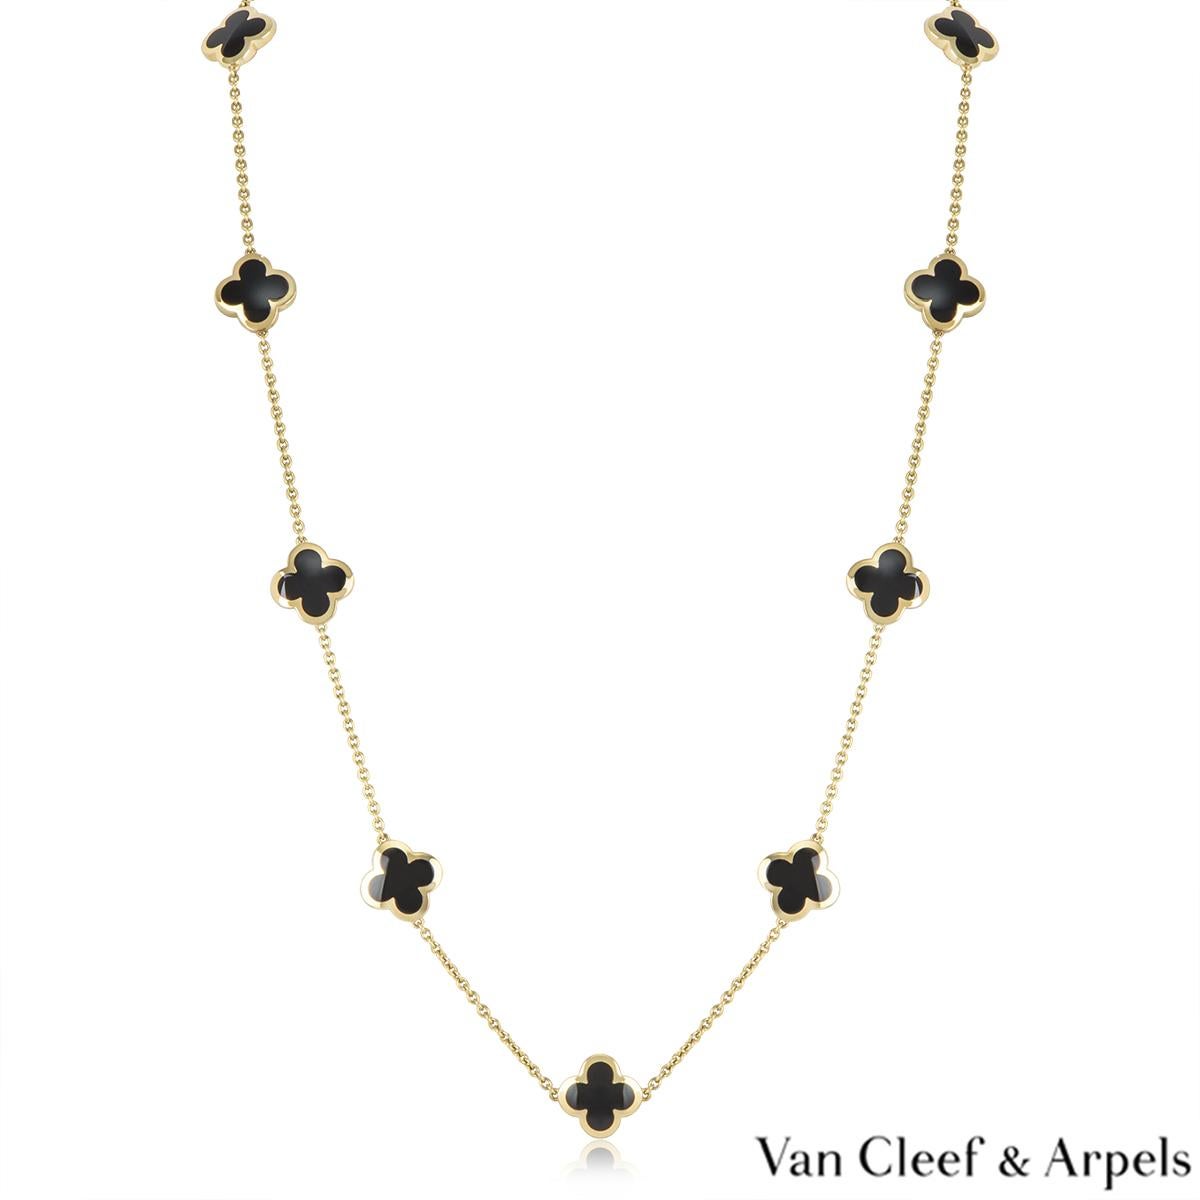 An 18k yellow gold Pure Alhambra necklace by Van Cleef & Arpels. The necklace is composed of 14 iconic four leaf clover motifs, set to the centre with onyx inlays and a polished outer edge. The necklace measures 32 inches in length and has a gross